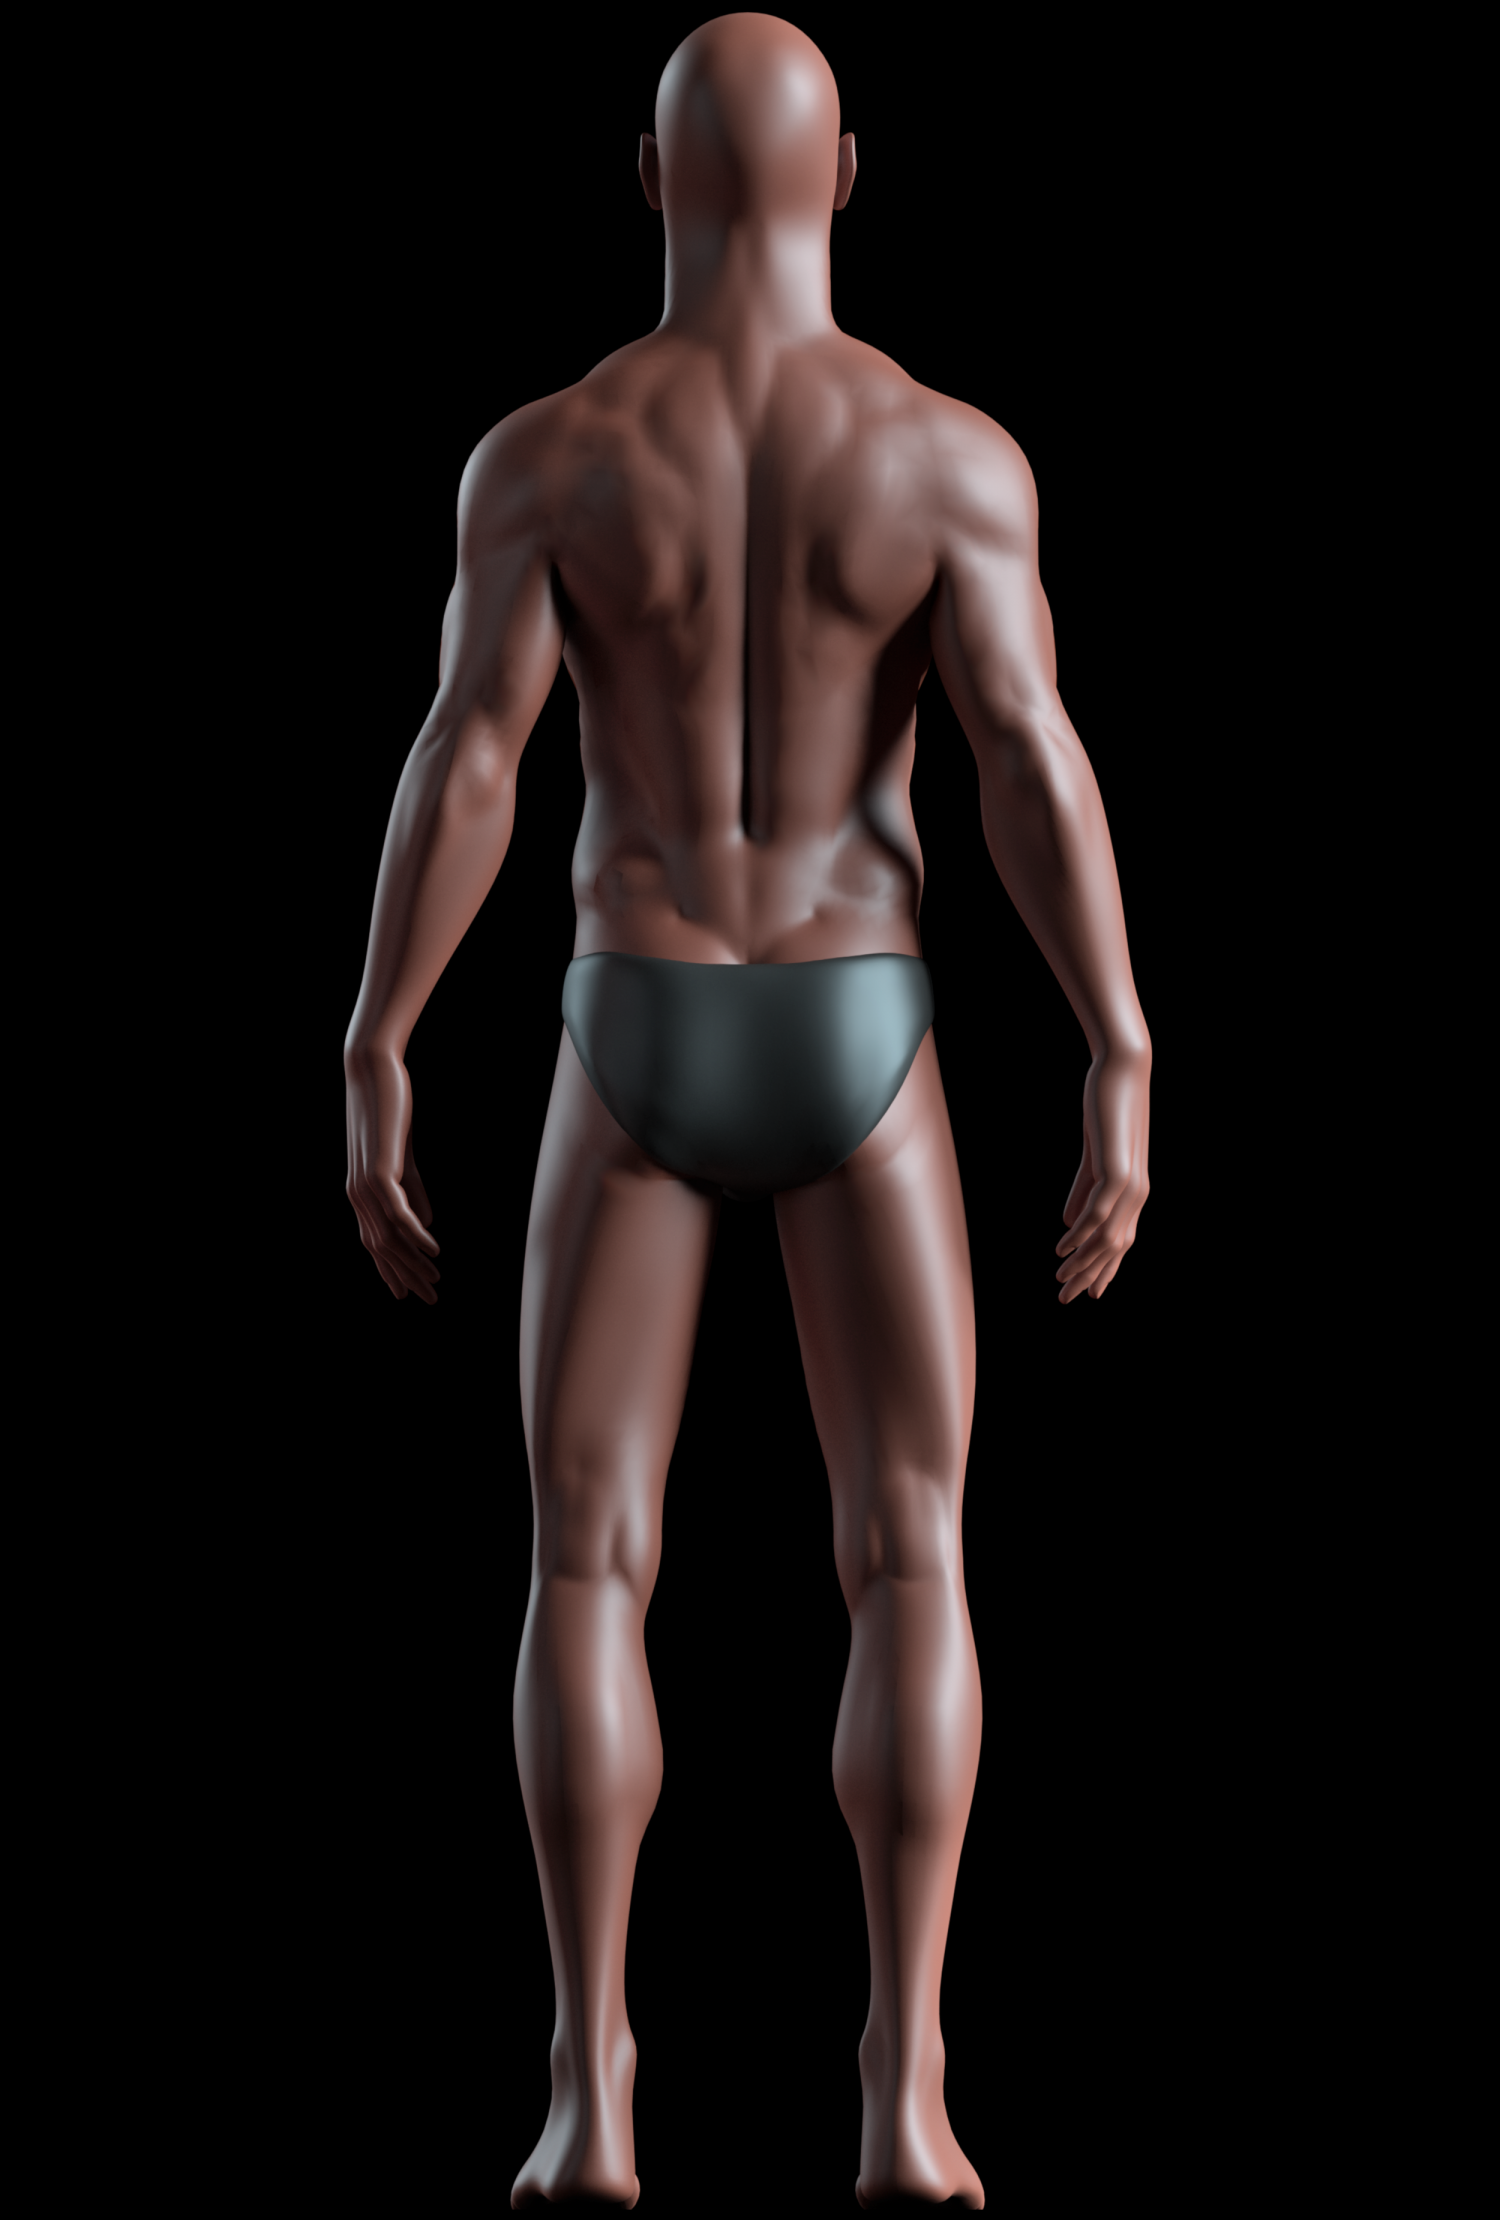 Person // 3D Model Download for Blender 3.4.1 by CappyAdams on